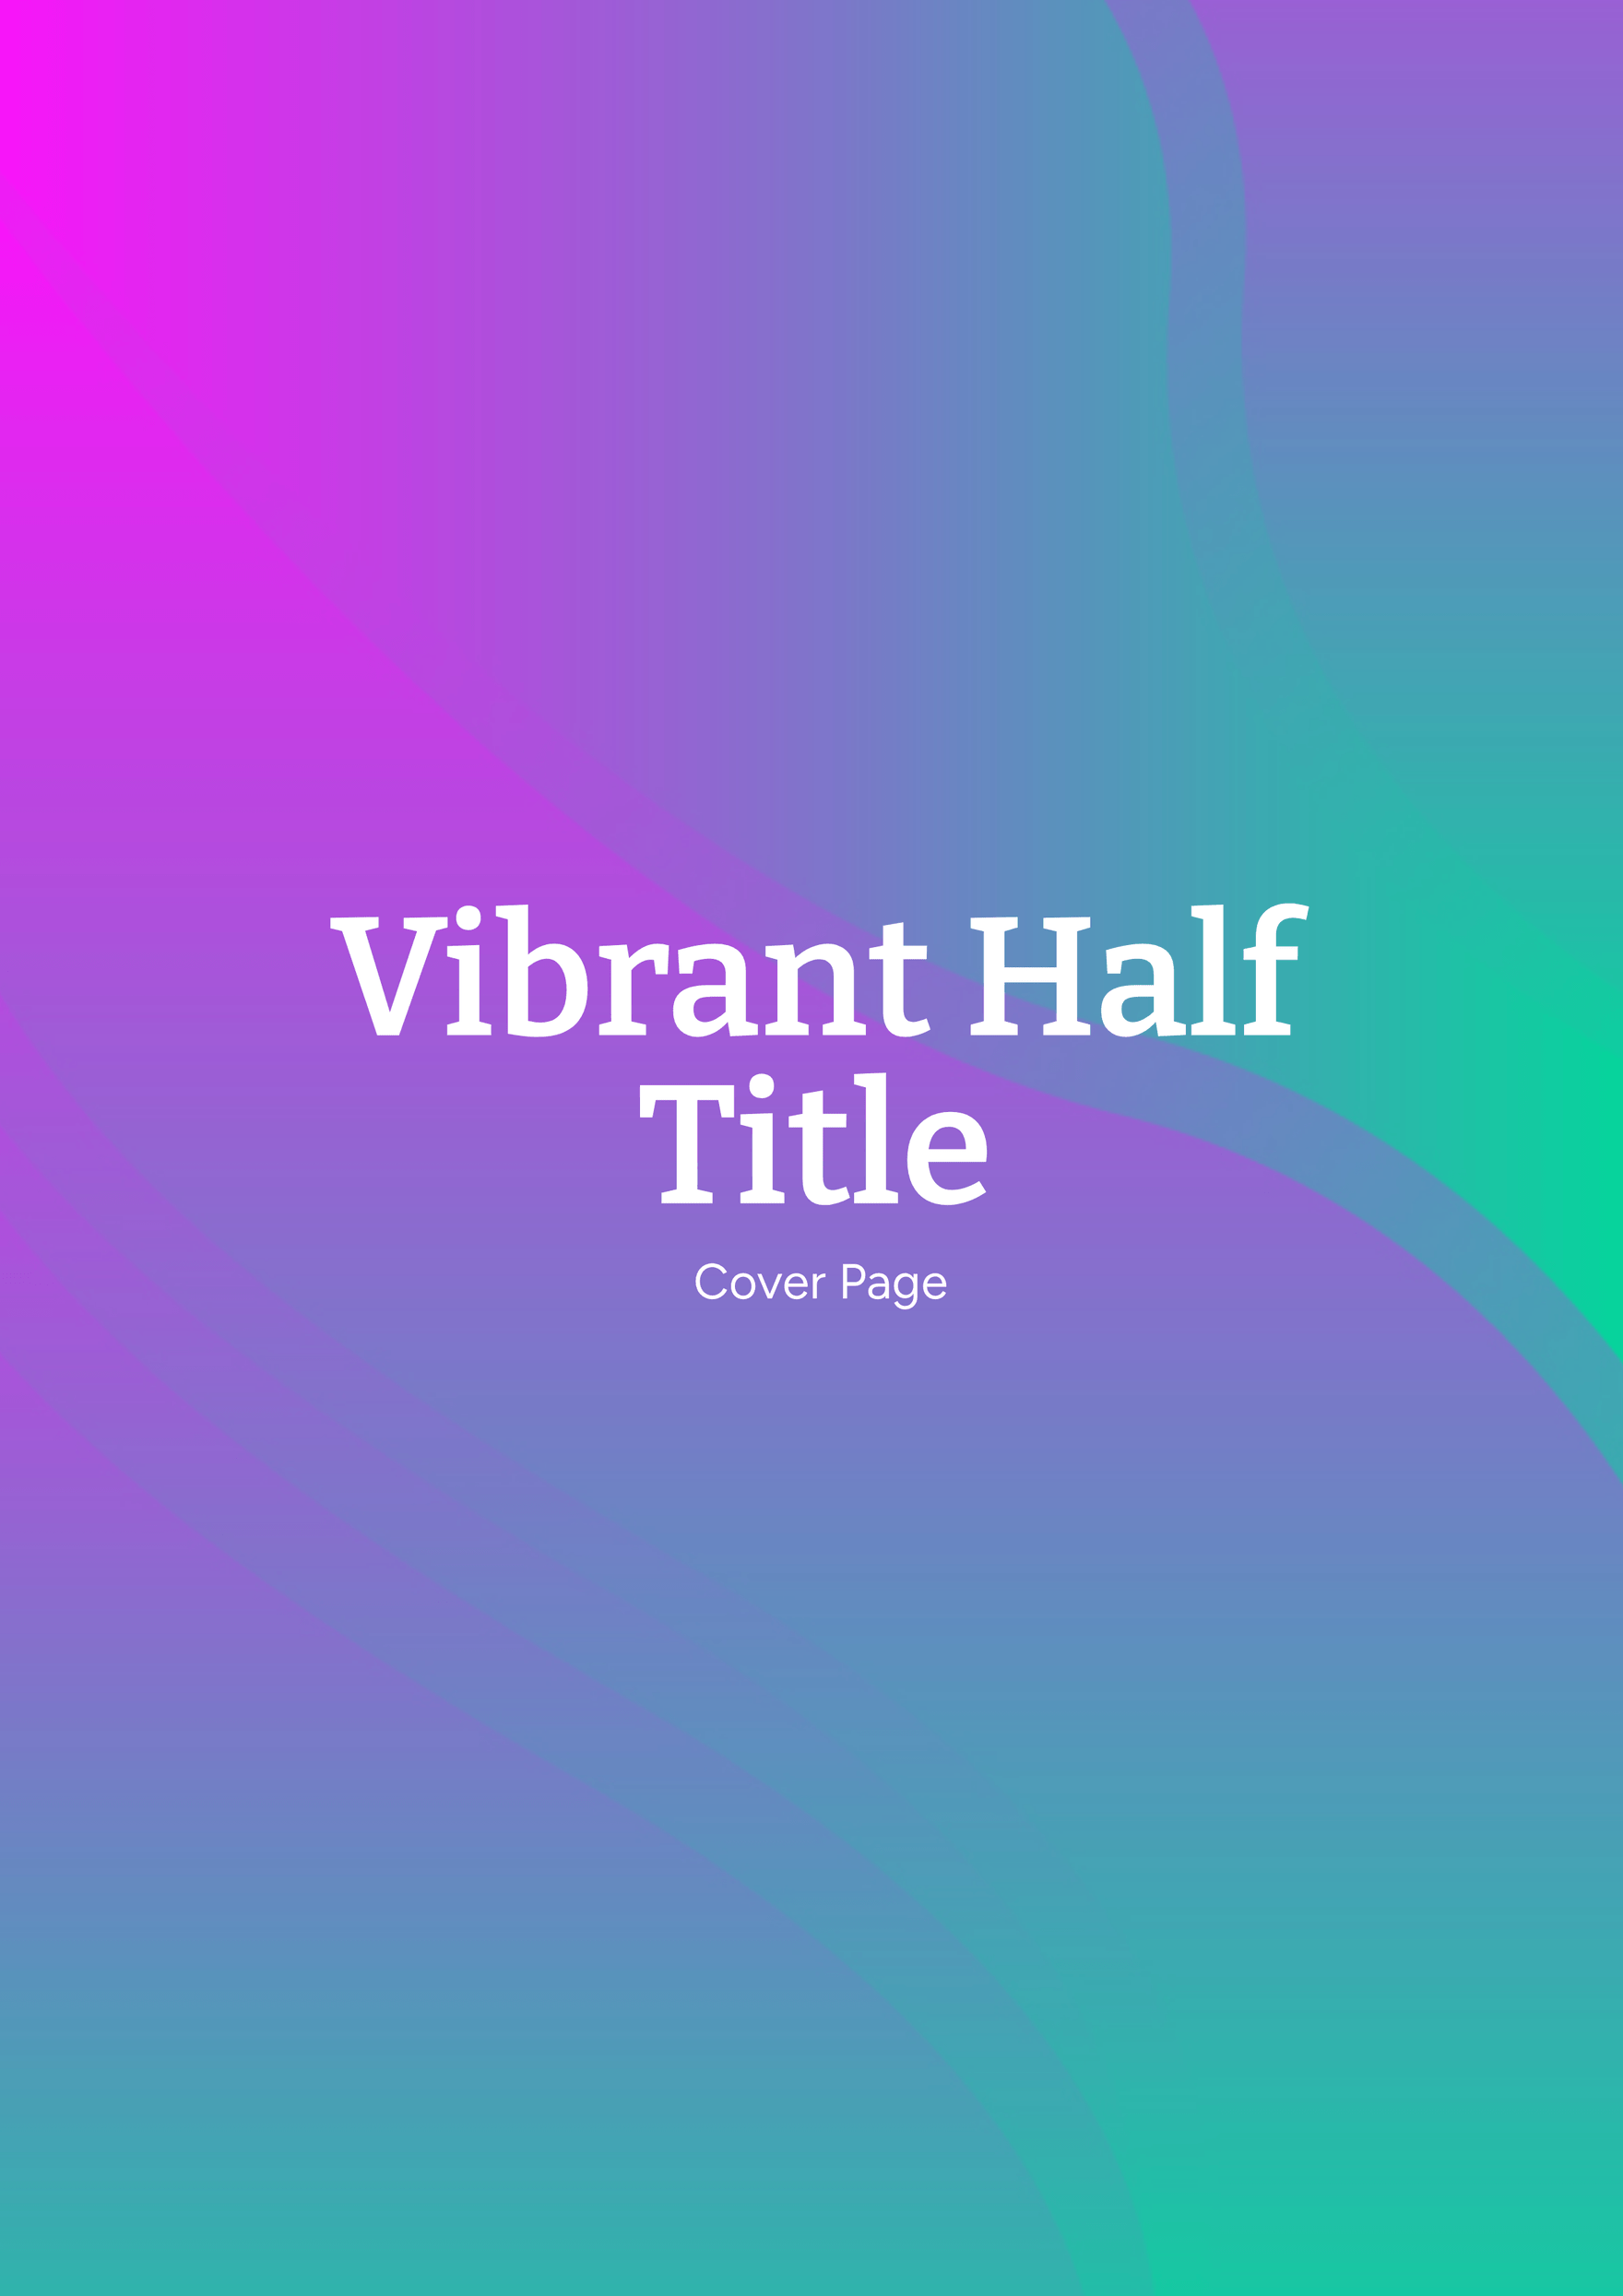 Vibrant Half Title Cover Page Template